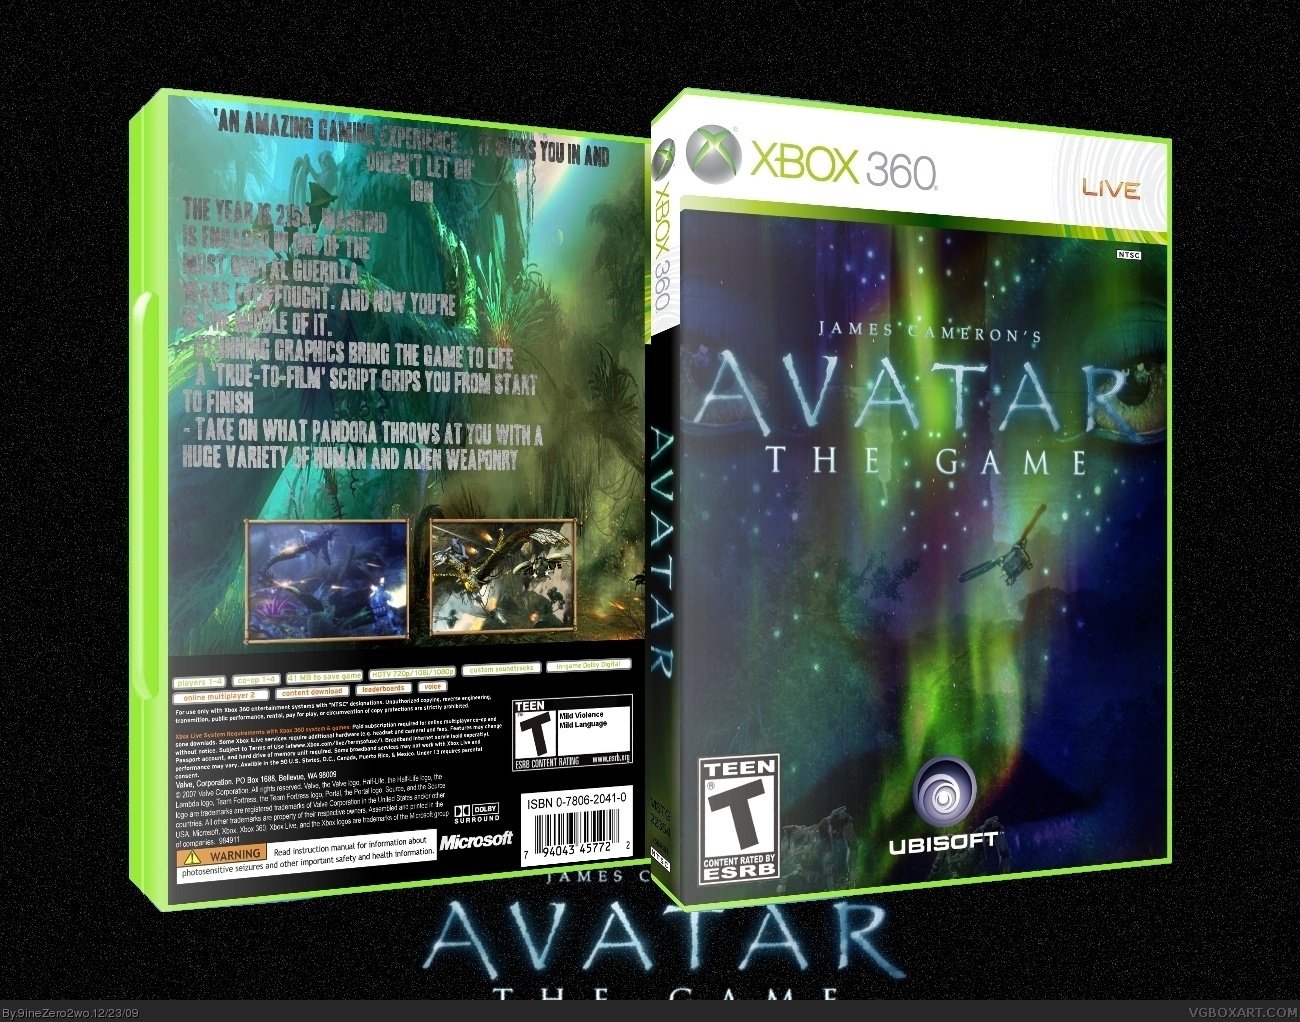 Avatar: The Game box cover